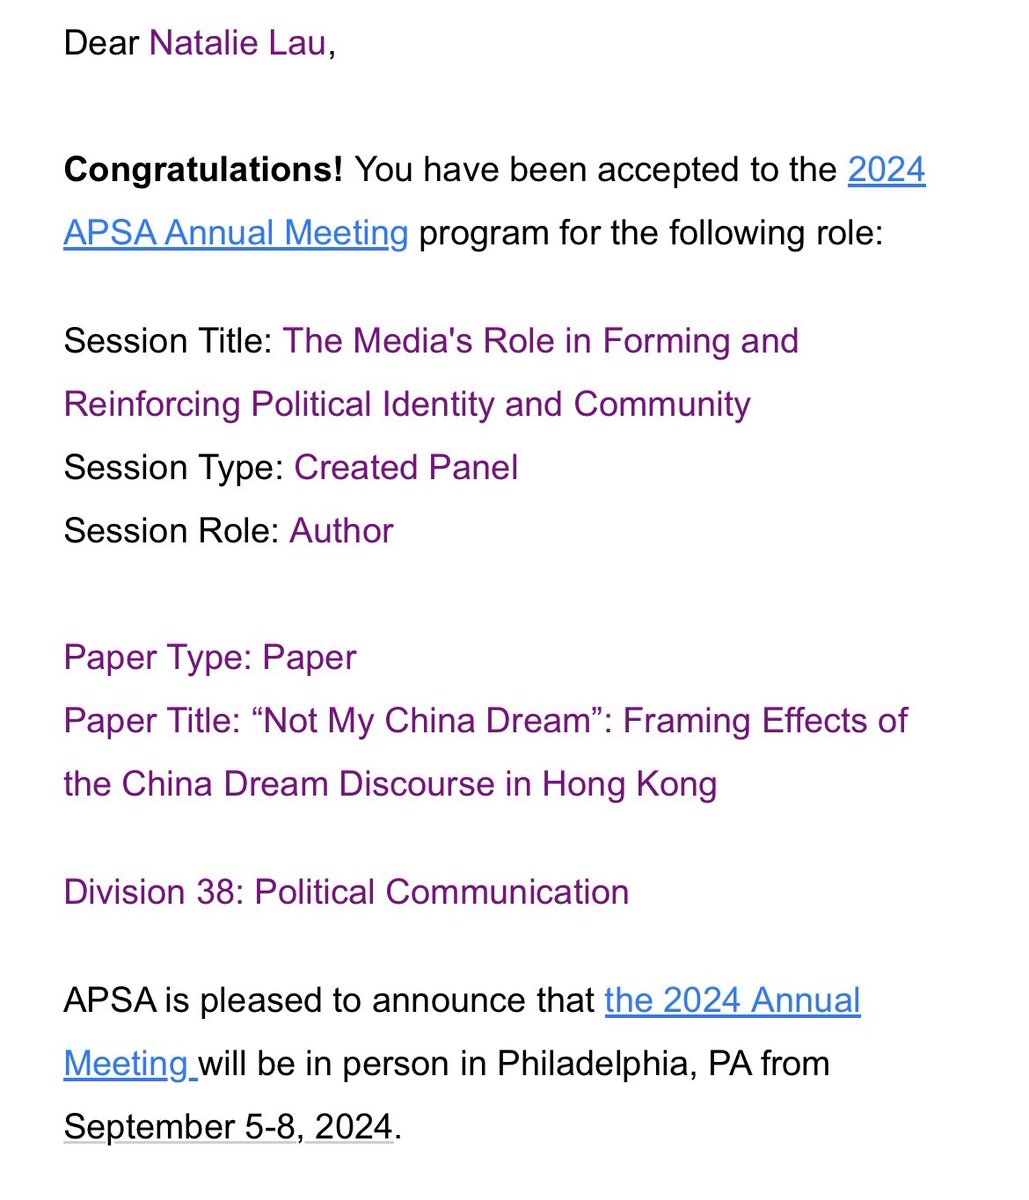 Thrilled to be presenting my work on the China Dream’s framing effects in Hong Kong at #APSA2024! Can’t wait to take part in my second APSA (and devour some Philly cheesesteaks..)